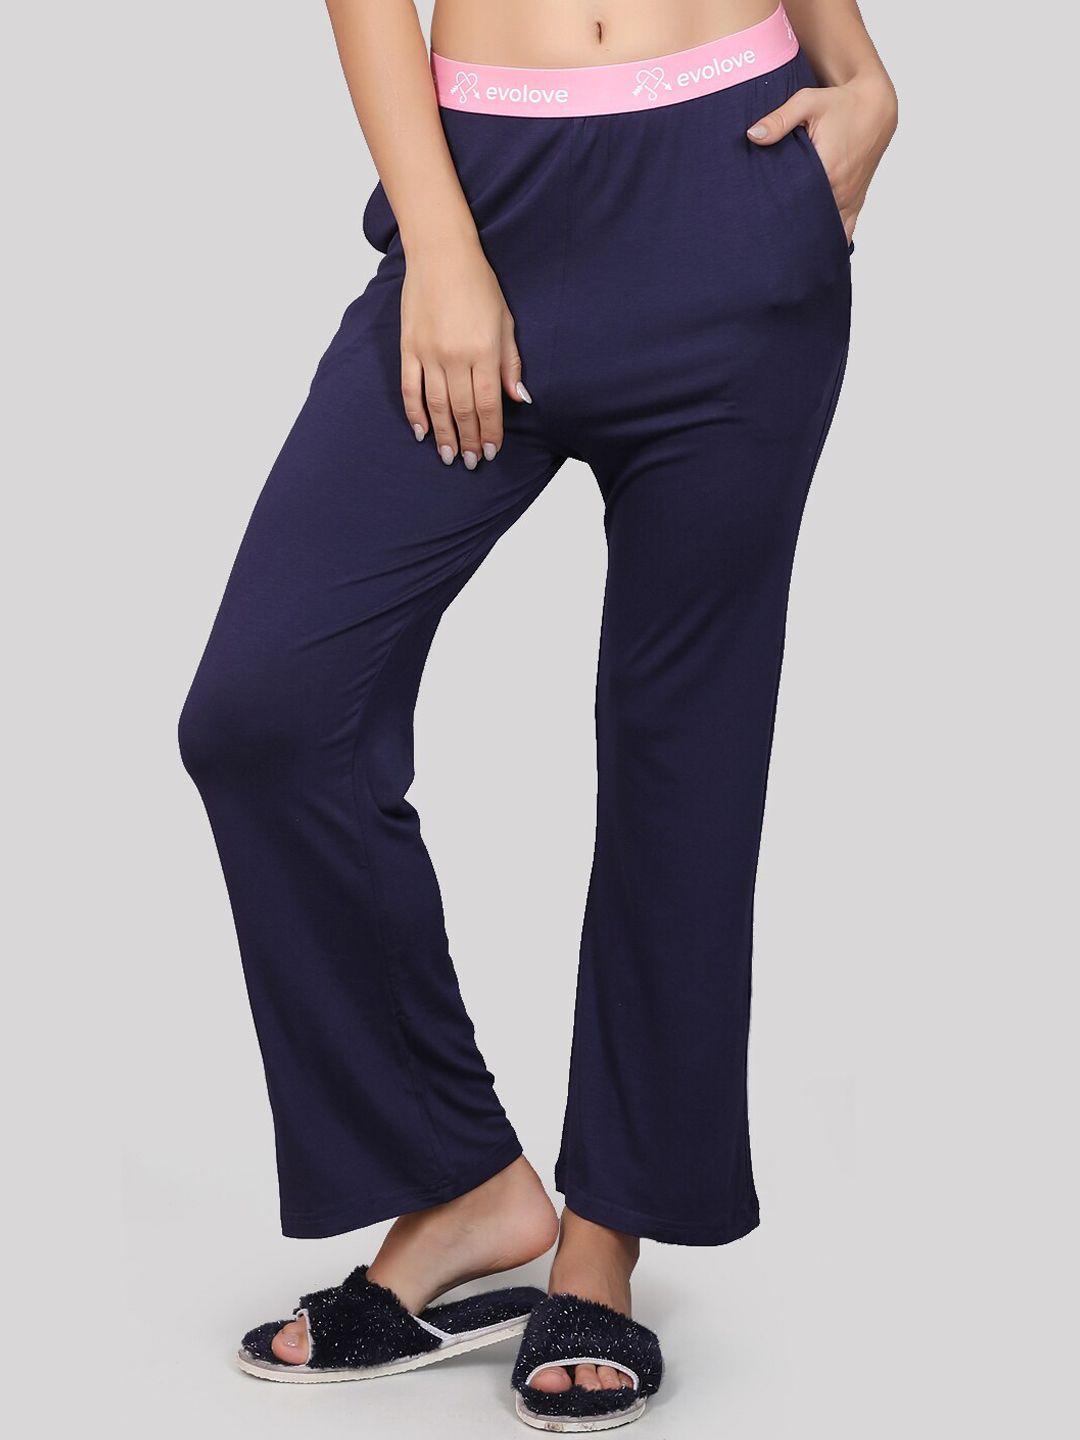 evolove relaxed fit lounge pants